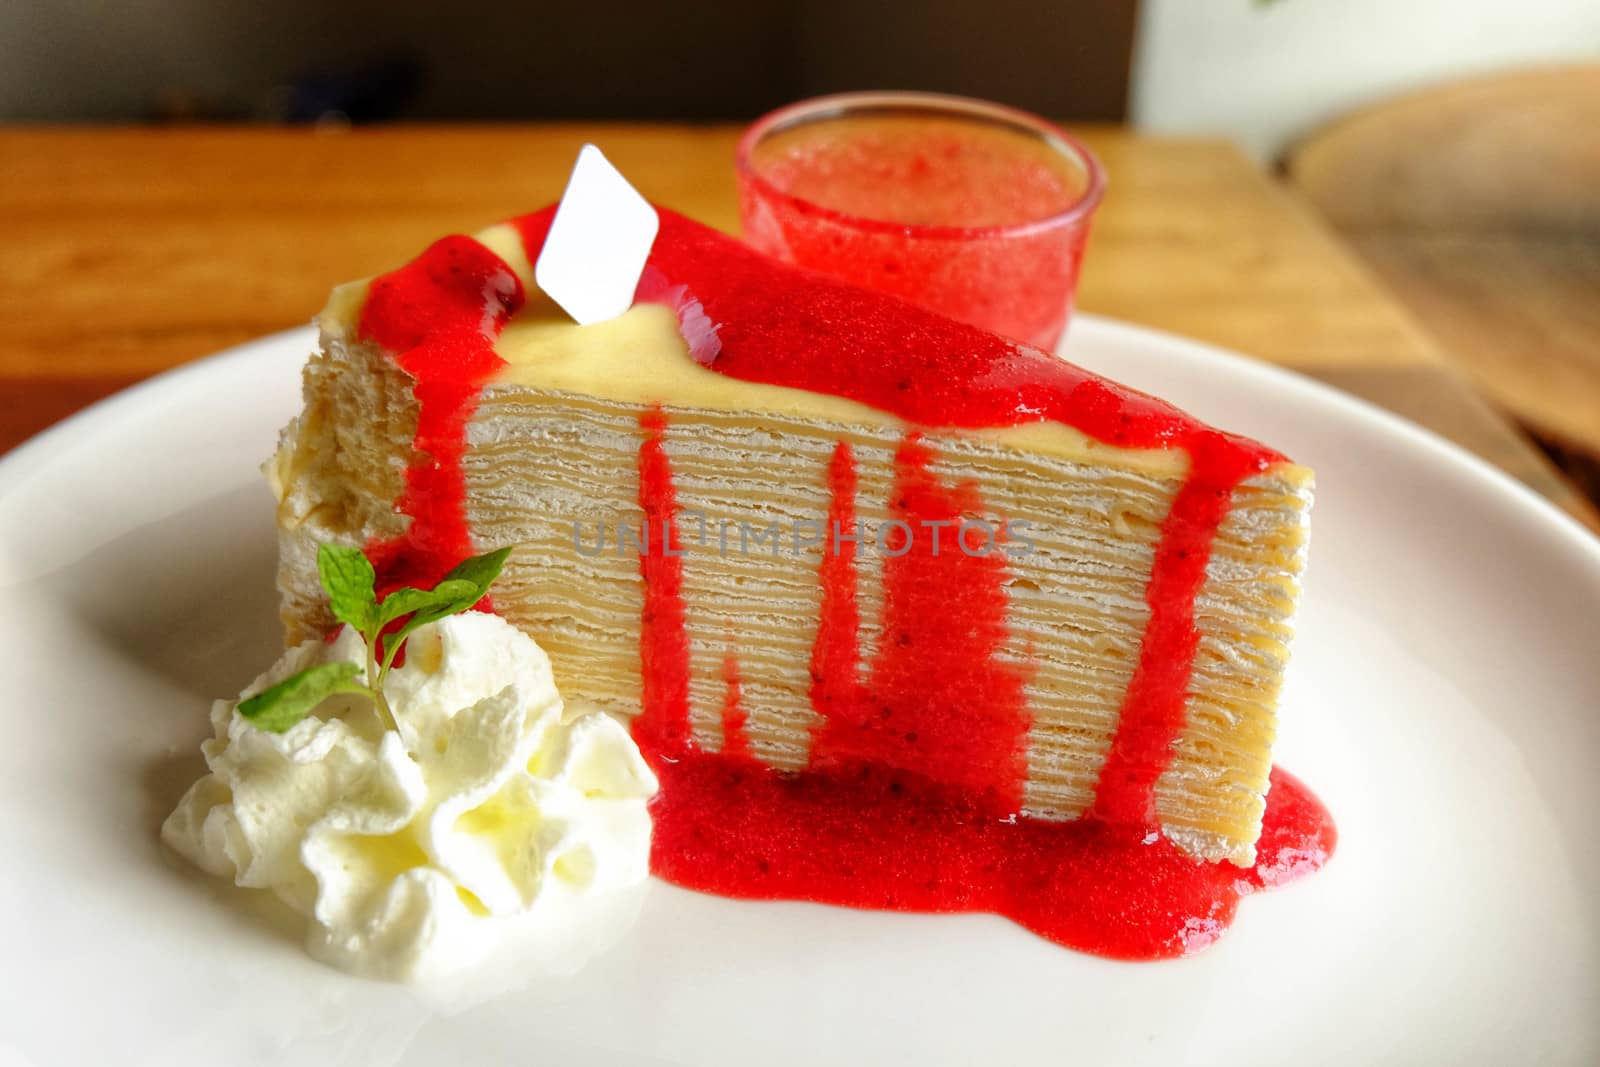 Crepe cake with cream and strawberry on top and sauce in ceramic cup on white plate.